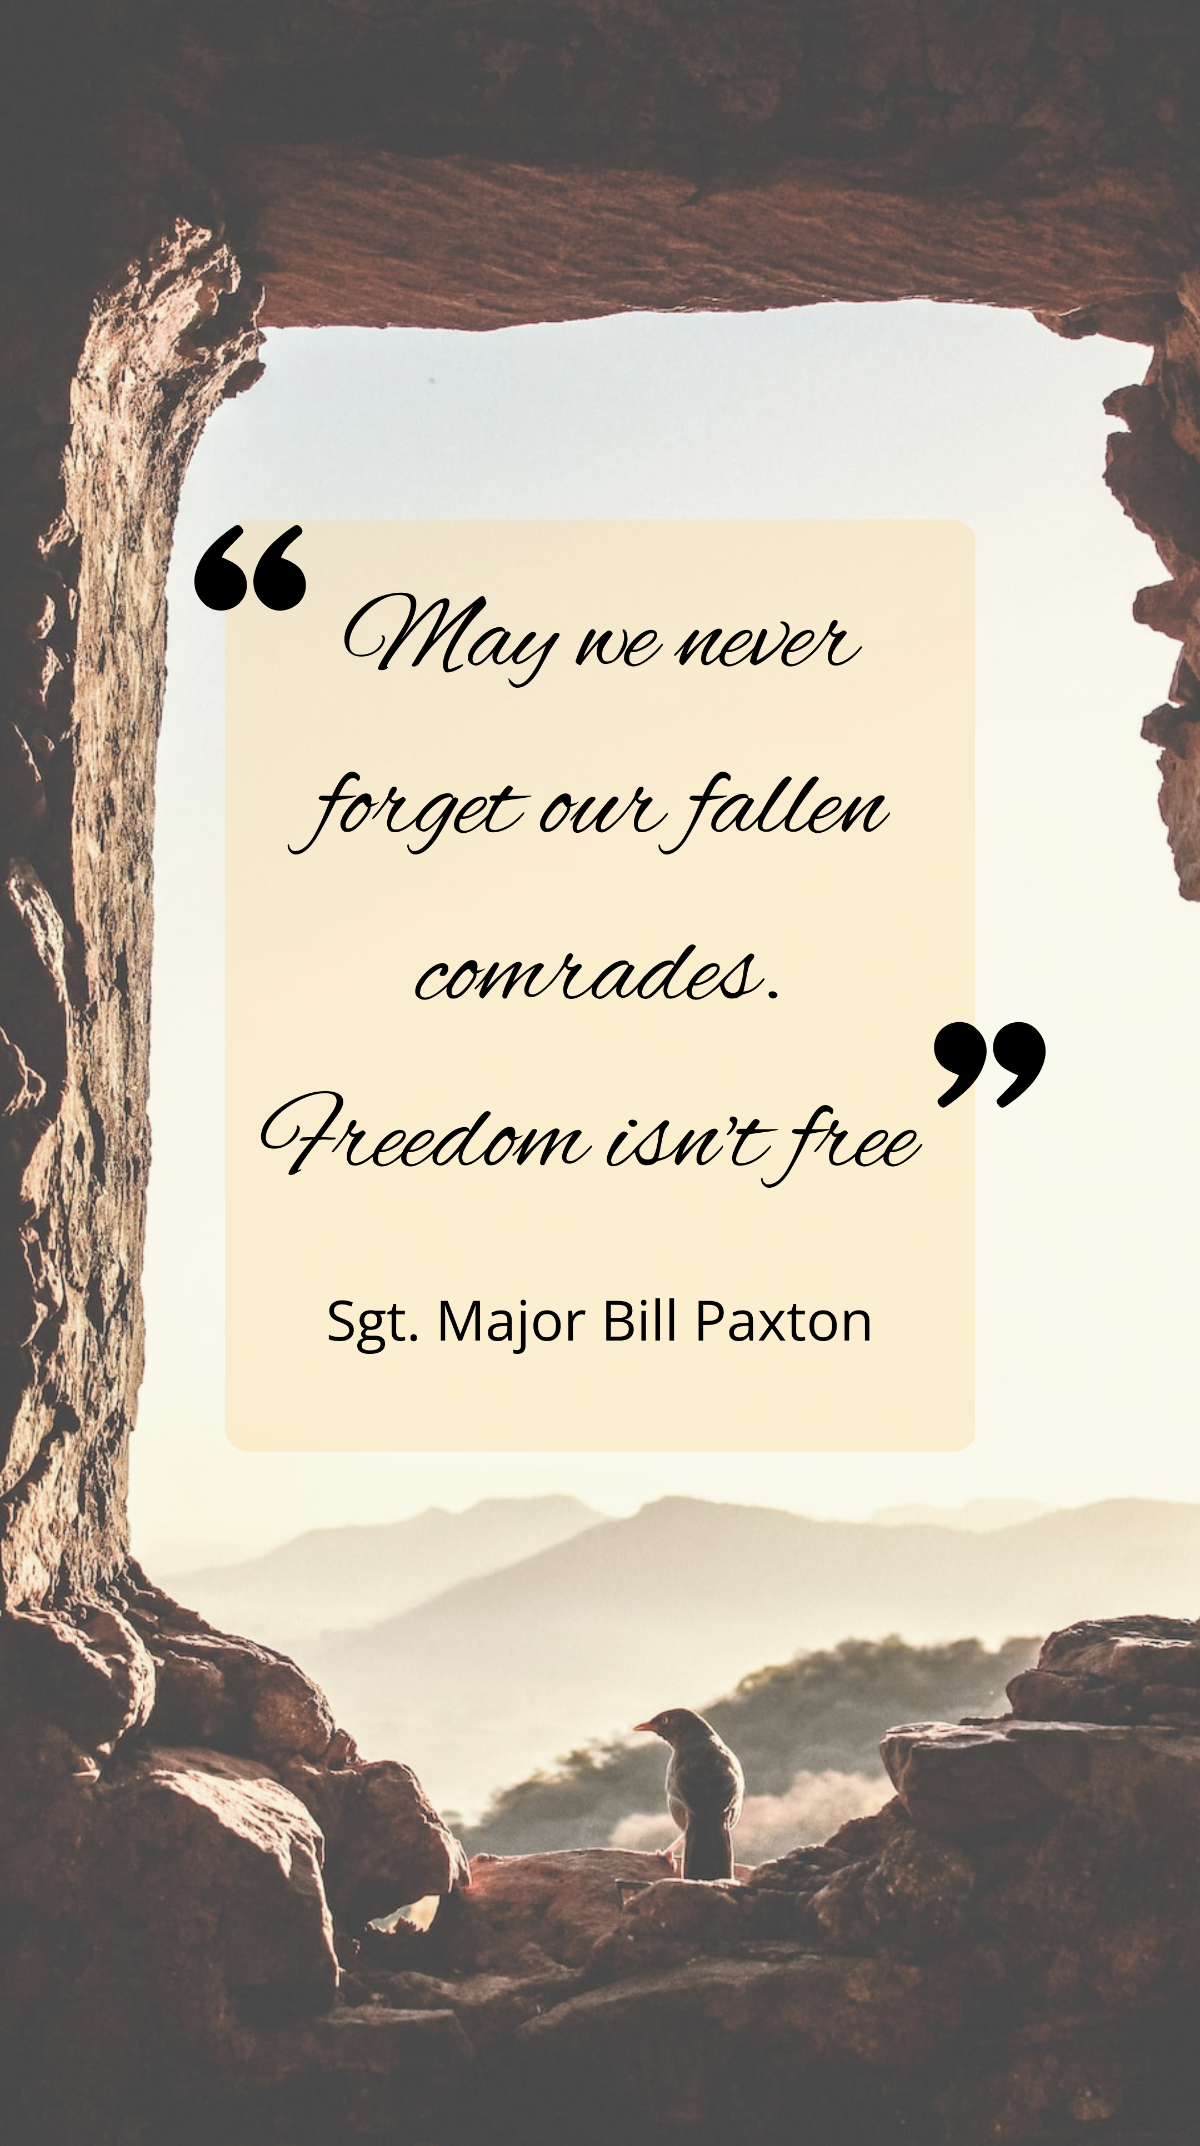 Sgt. Major Bill Paxton - May we never forget our fallen comrades. Freedom isn't Template